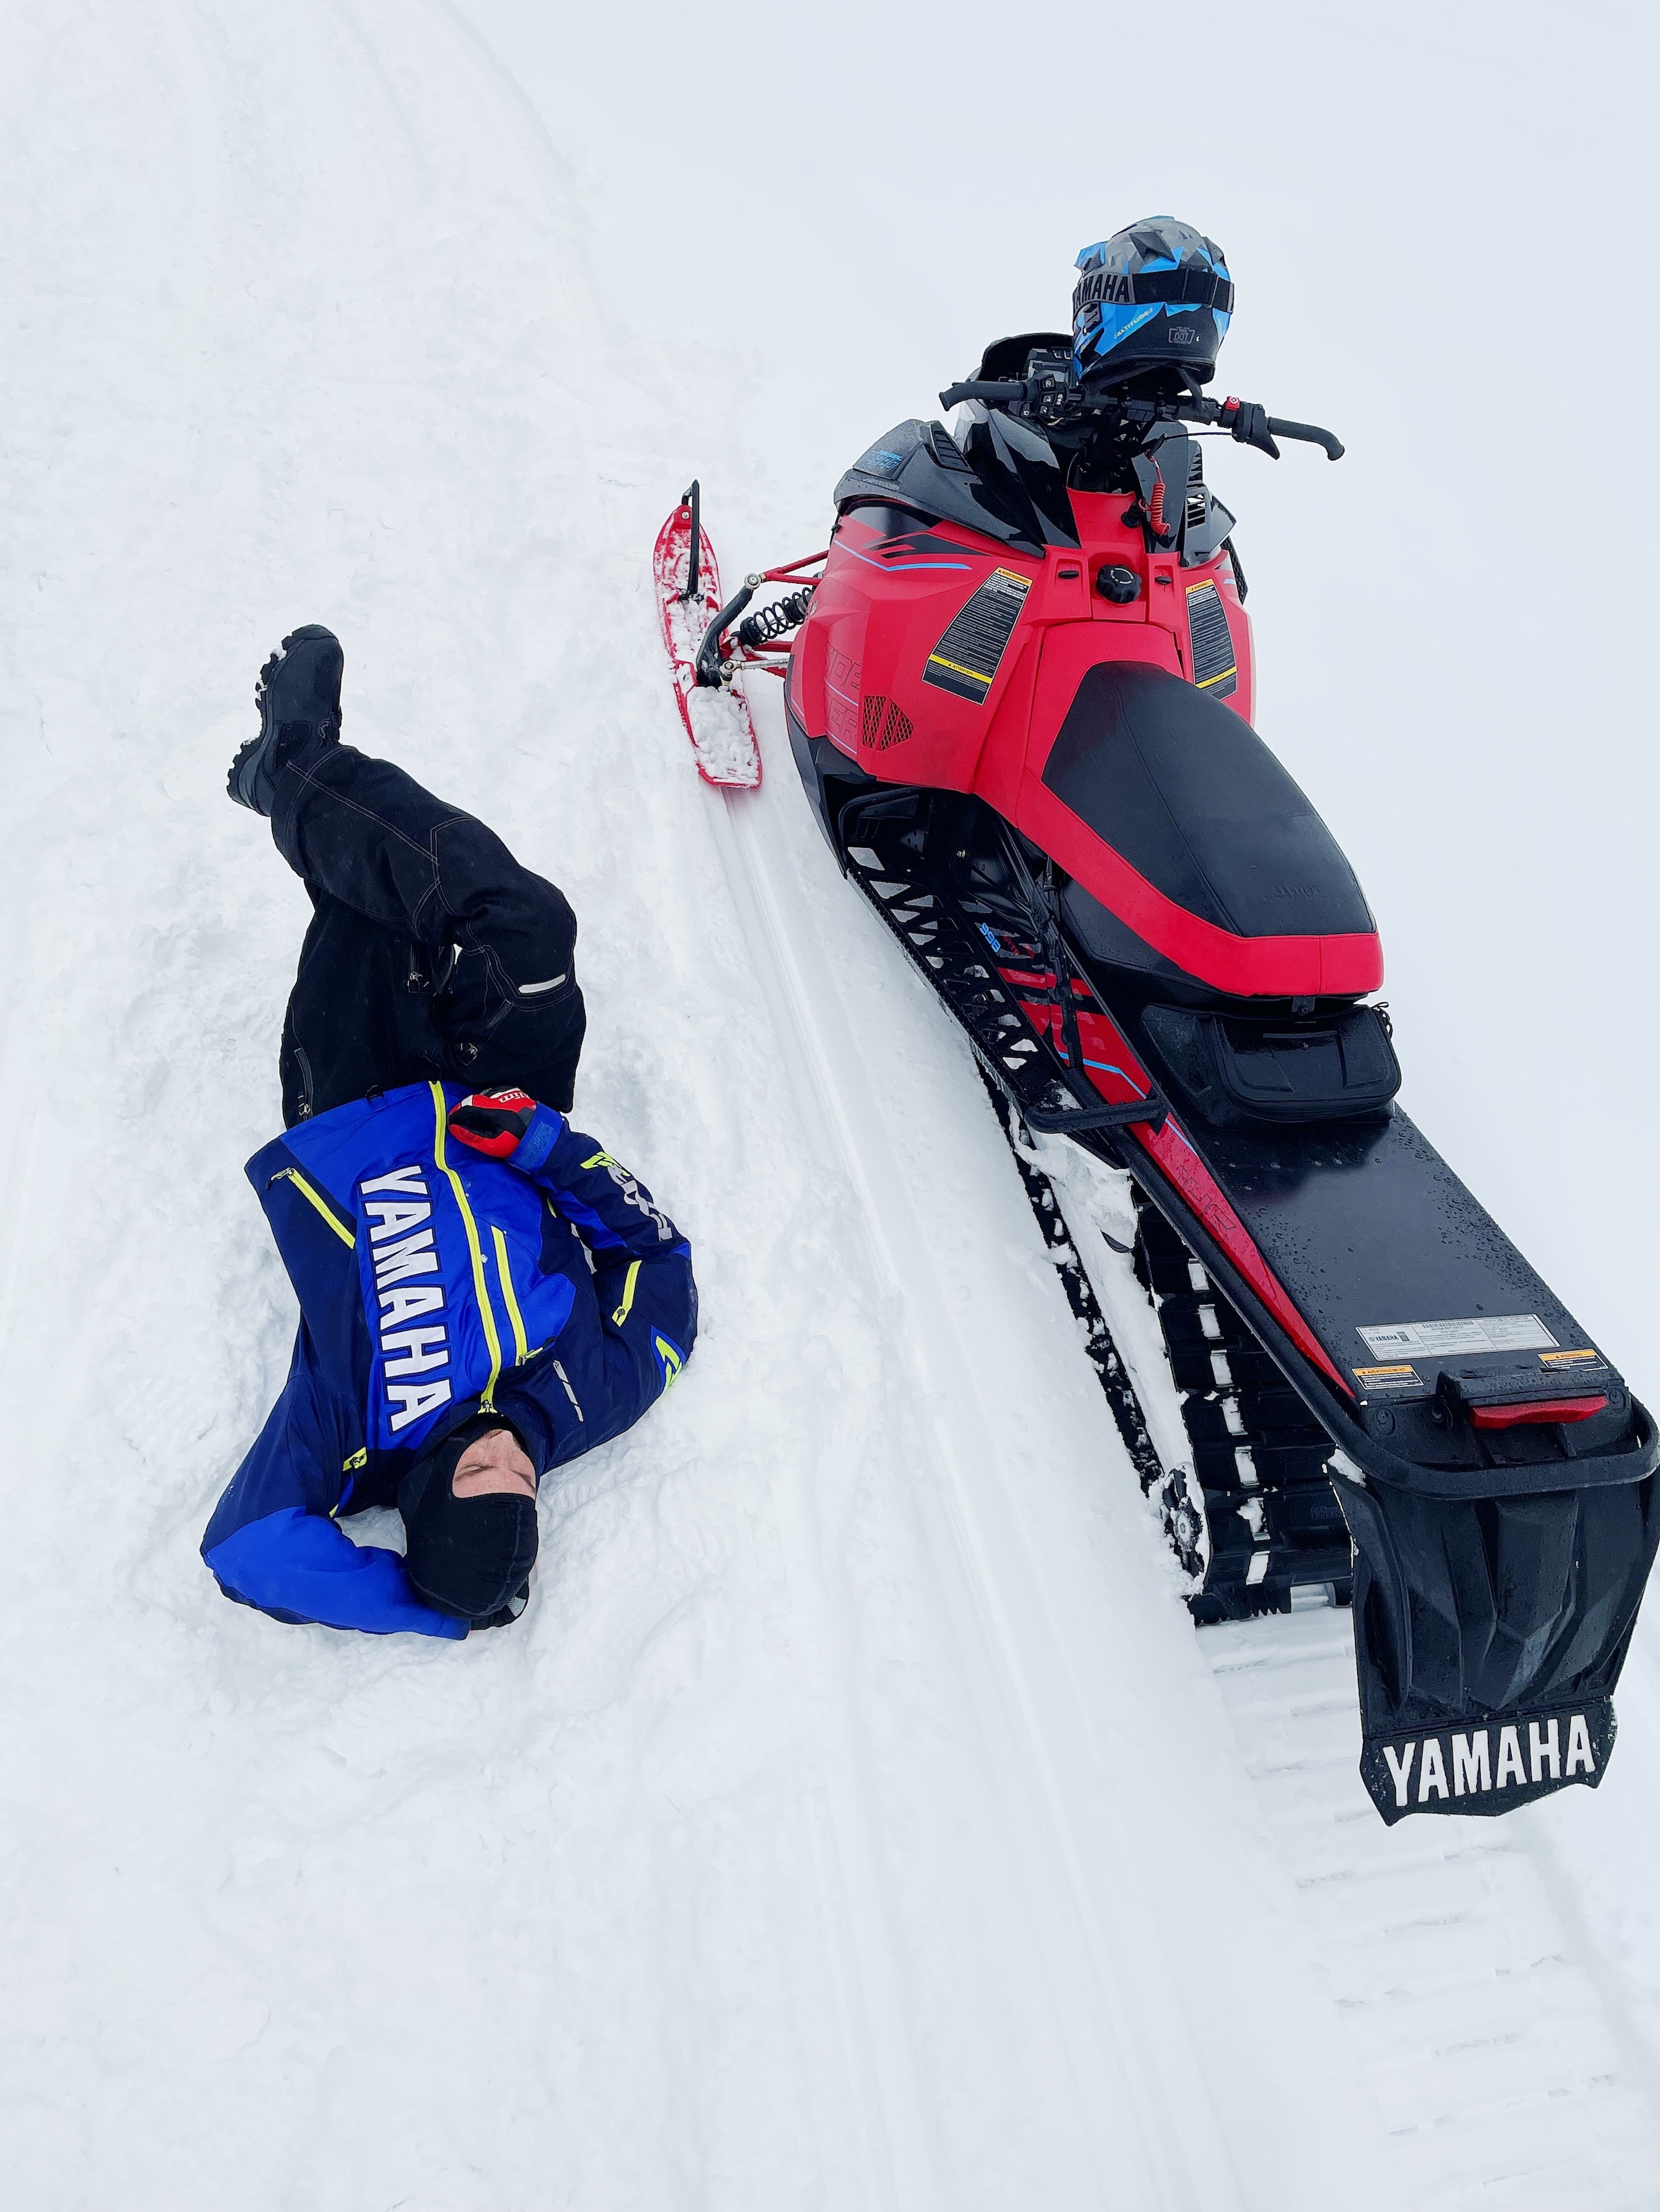 a shot from a above showing a man laying in a relaxed pose in the snow, next to his snowmobile.